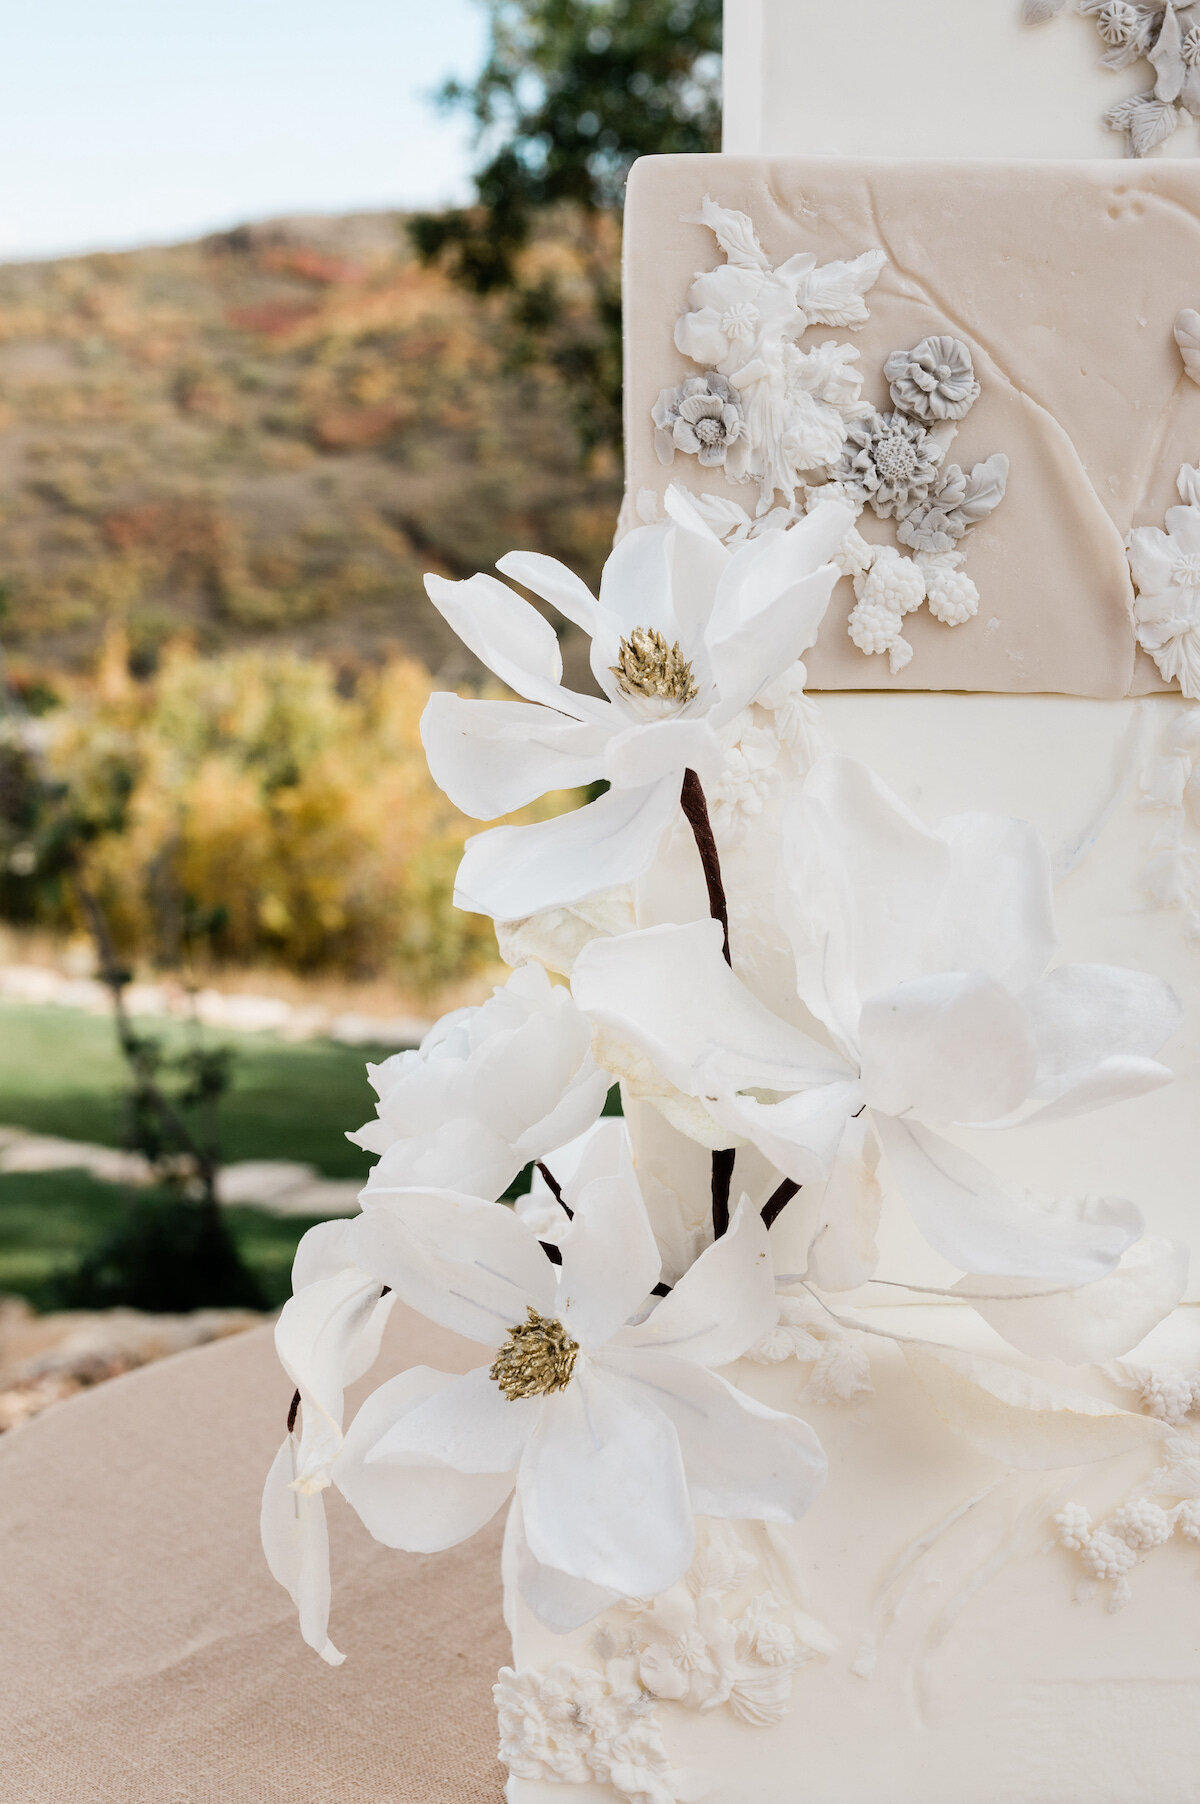 Every glance, every smile—our destination wedding photography in Park City, Utah, captures the genuine emotions of your special day. Each photograph tells a story of love against a backdrop of natural beauty.